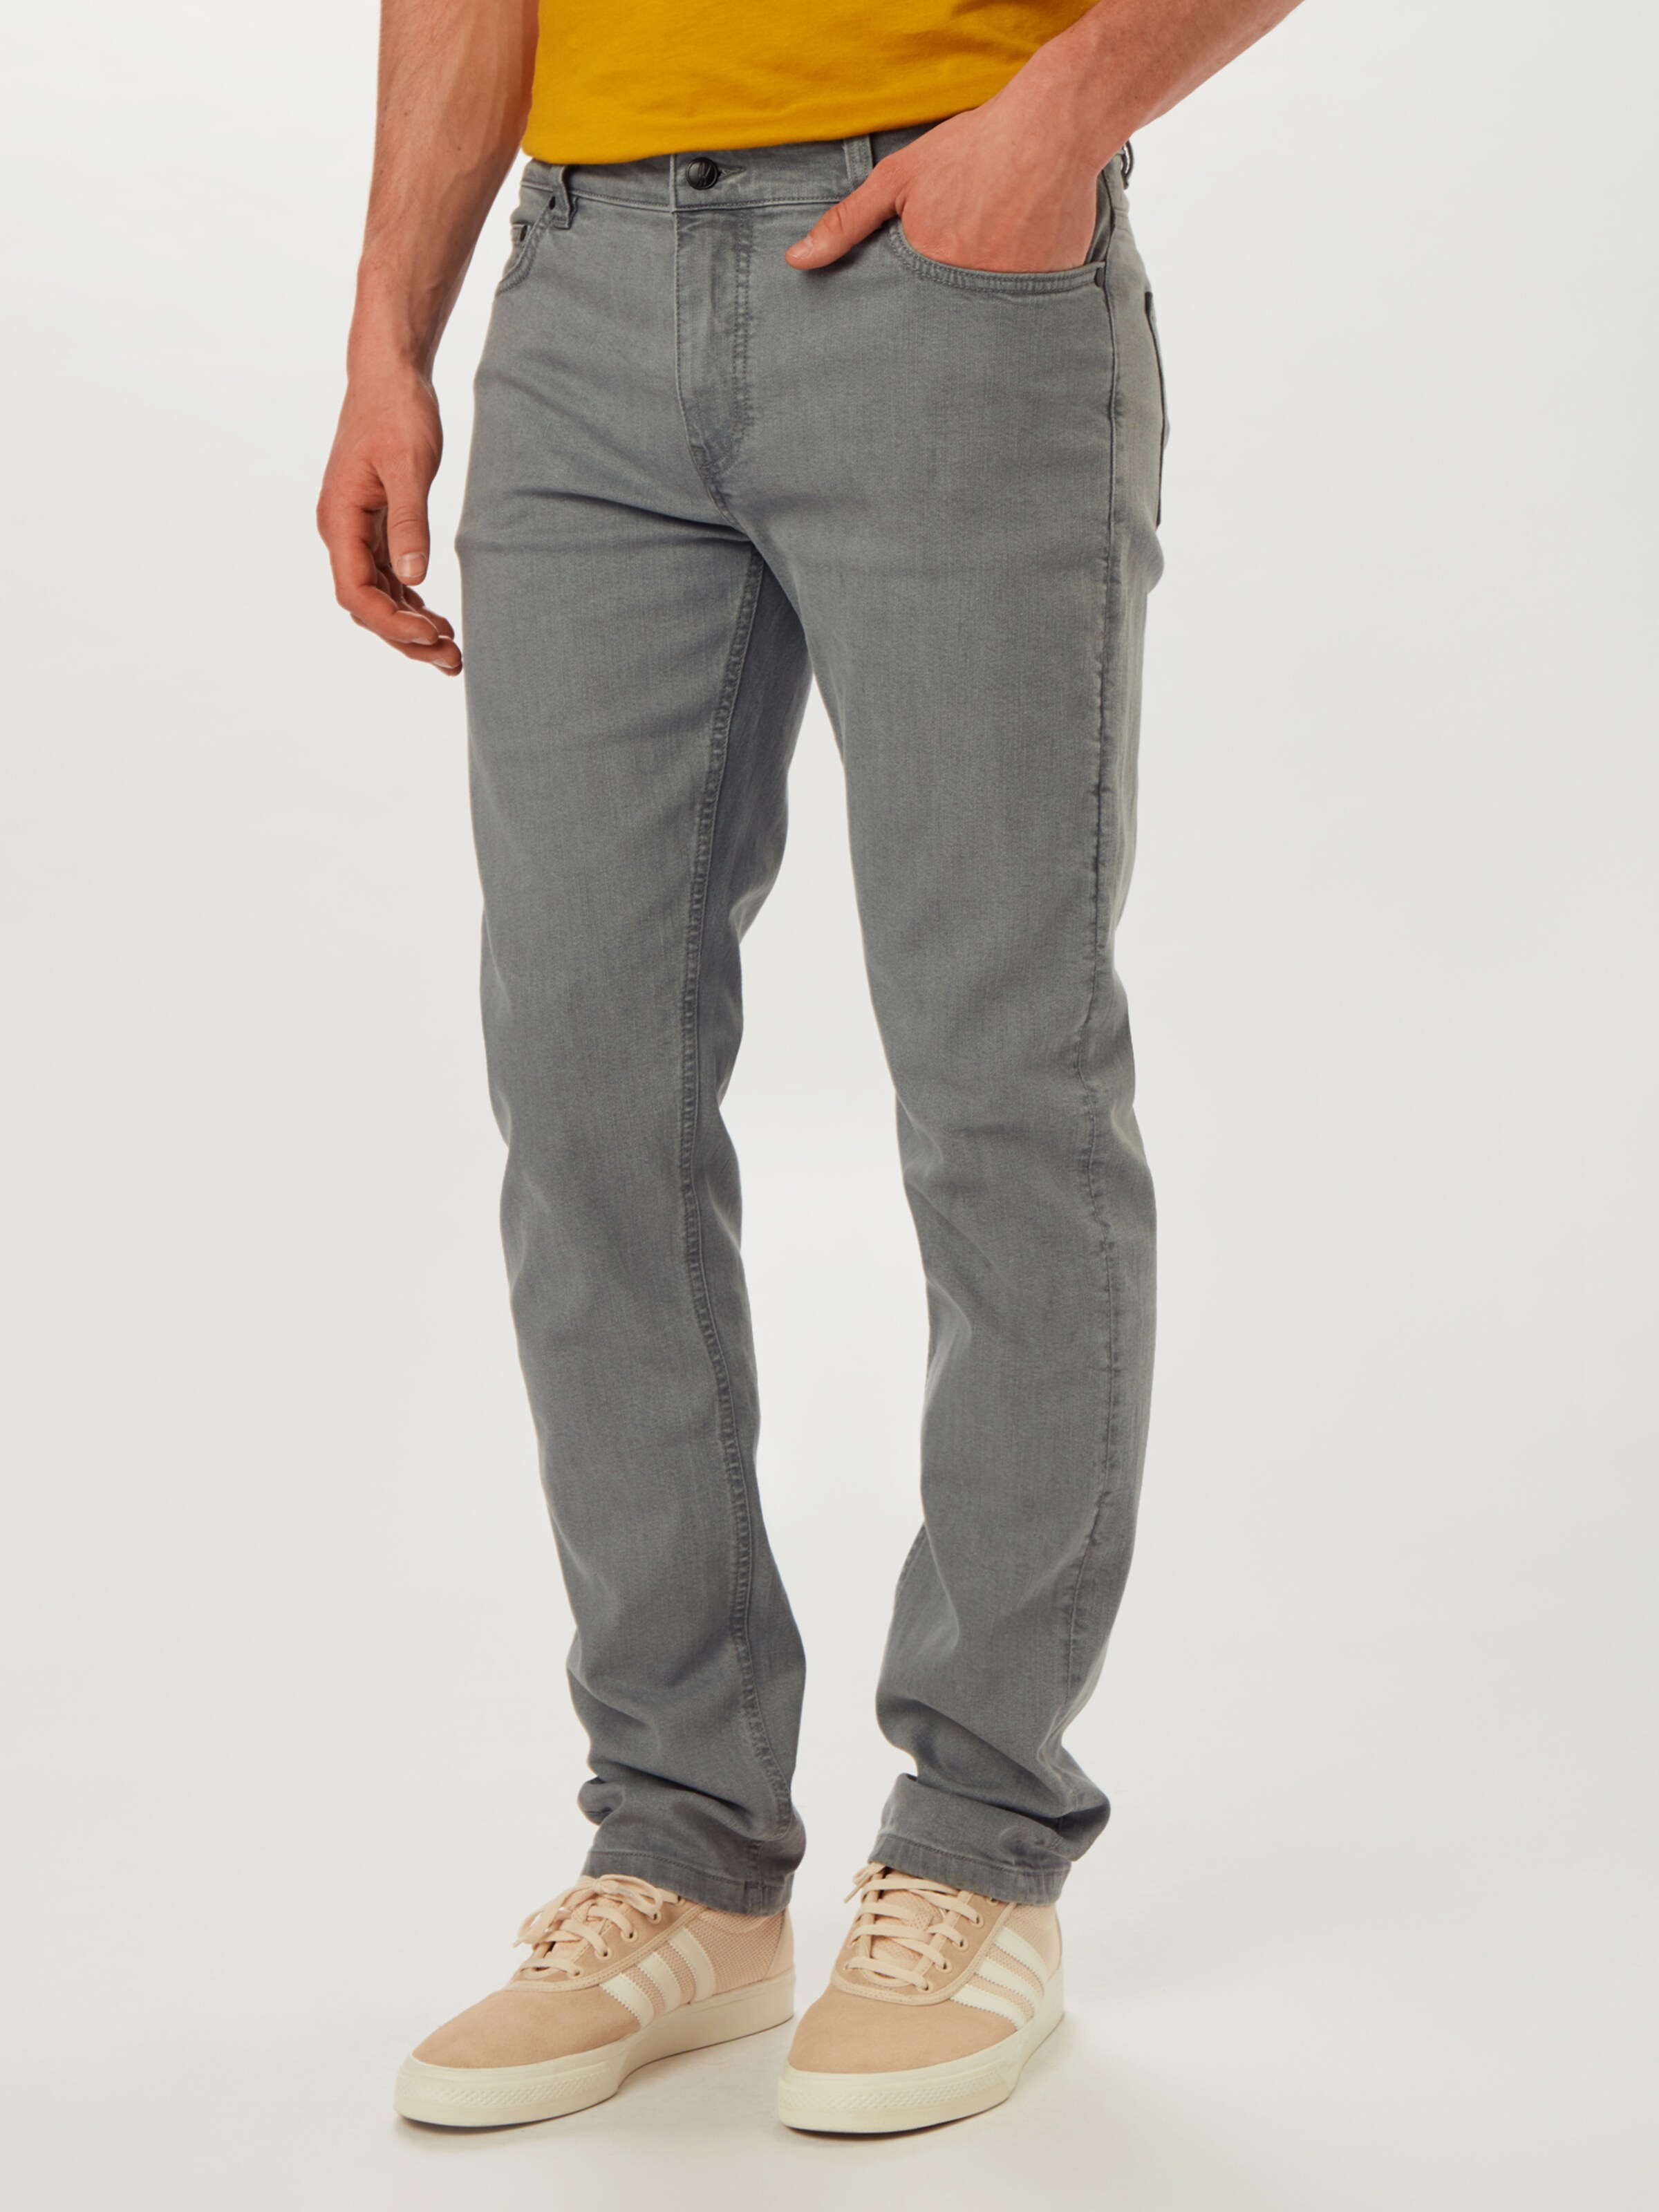 Jeans pNdNu bleed clothing Jeans Active 2.0 in Grigio 